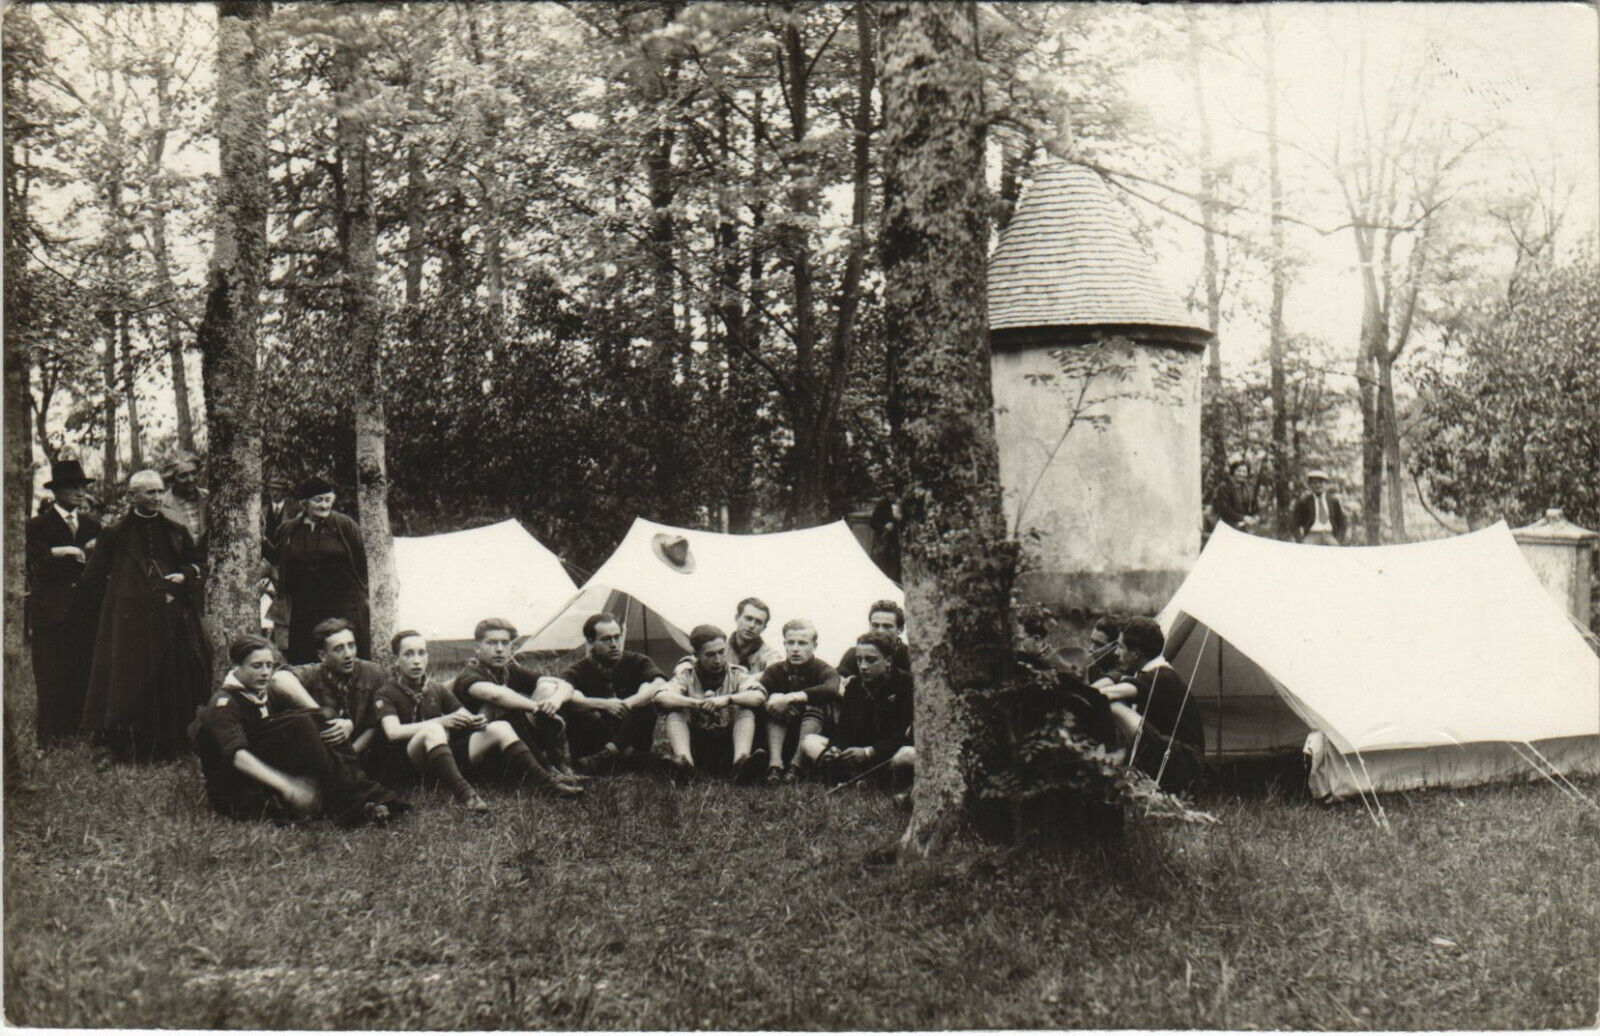 PC SCOUTING, SCOUTS AND TENTS, Vintage REAL PHOTO Postcard (b28302)